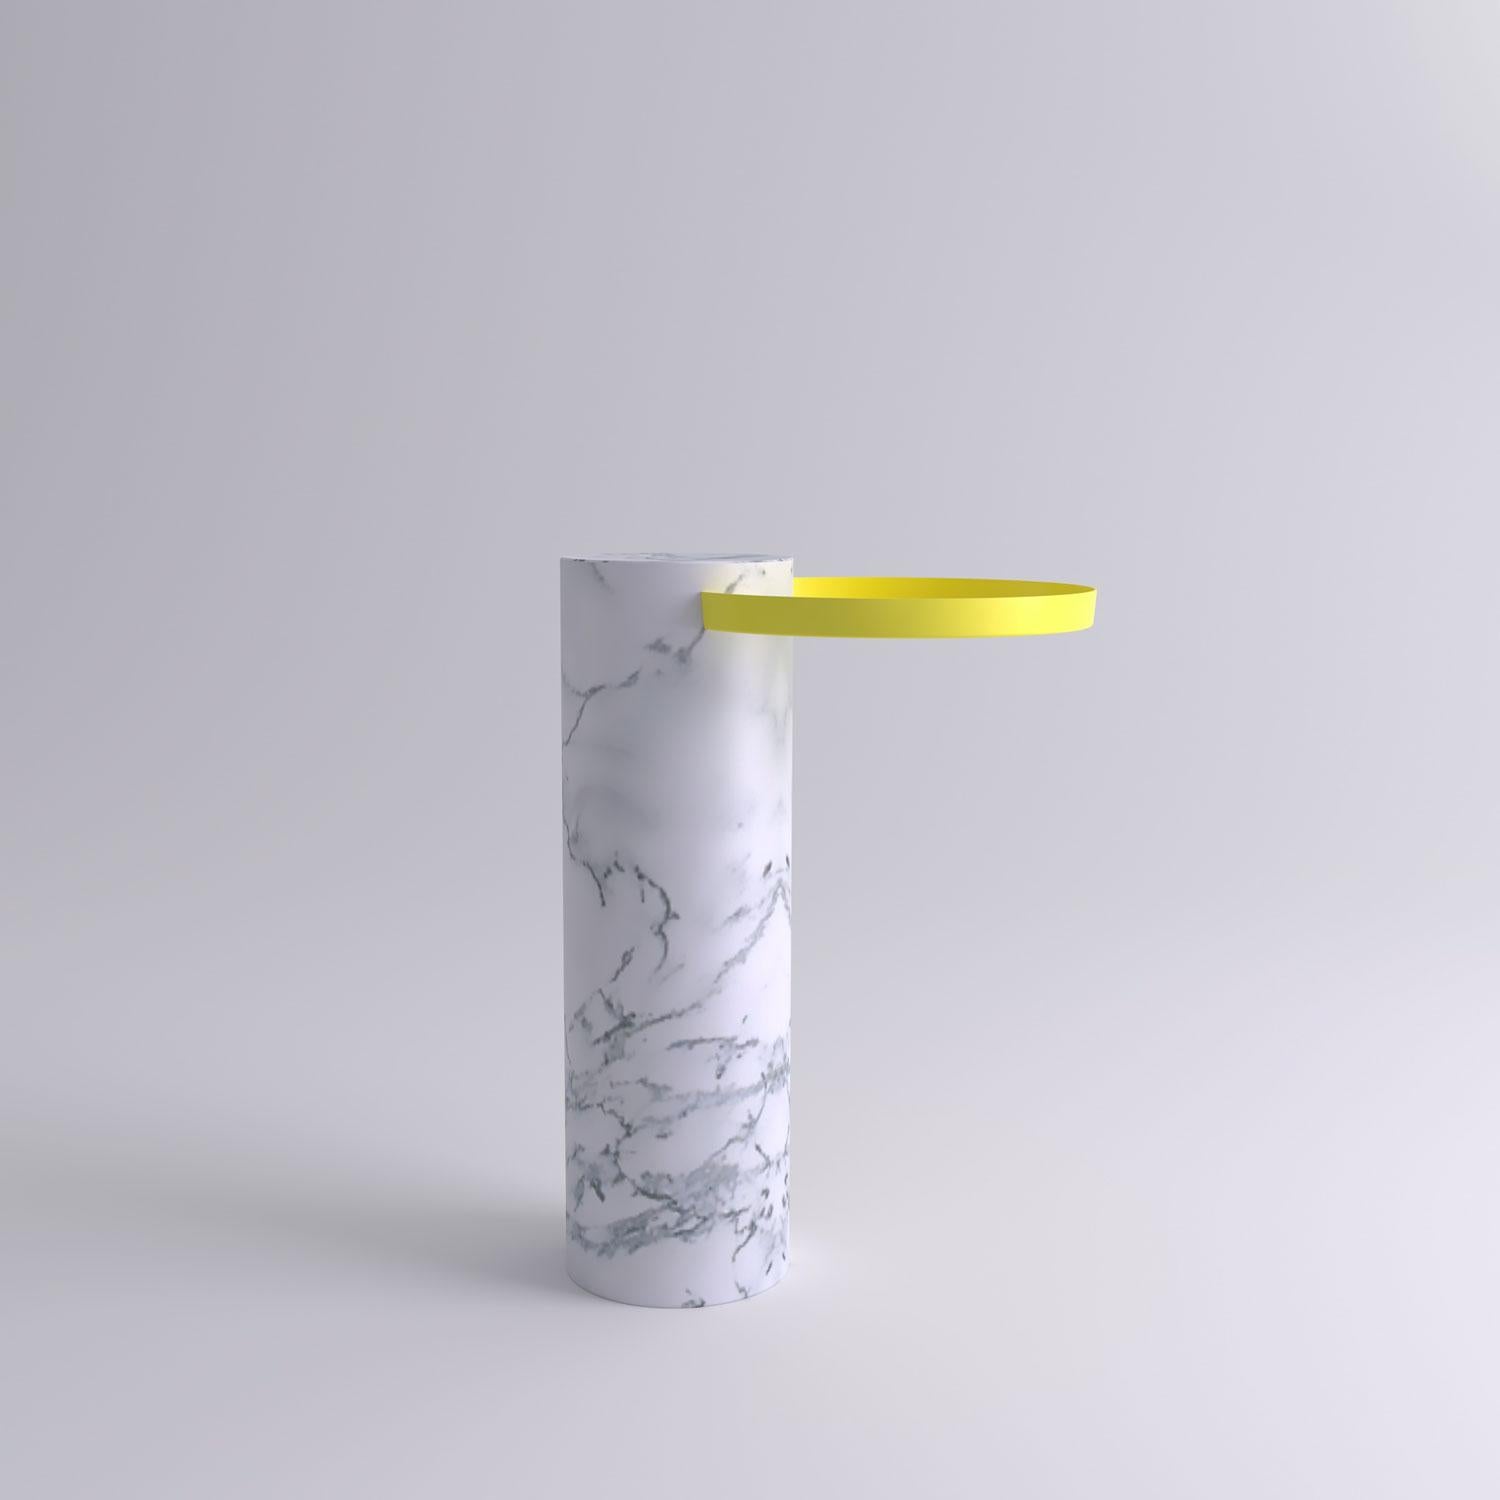 High white marble contemporary guéridon, Sebastian Herkner
Dimensions: D 42 x H 57 cm
Materials: Pele de Tigre marble, yellow metal tray

The salute table exists in 3 sizes, 4 different marble stones for the column and 5 different finishes for